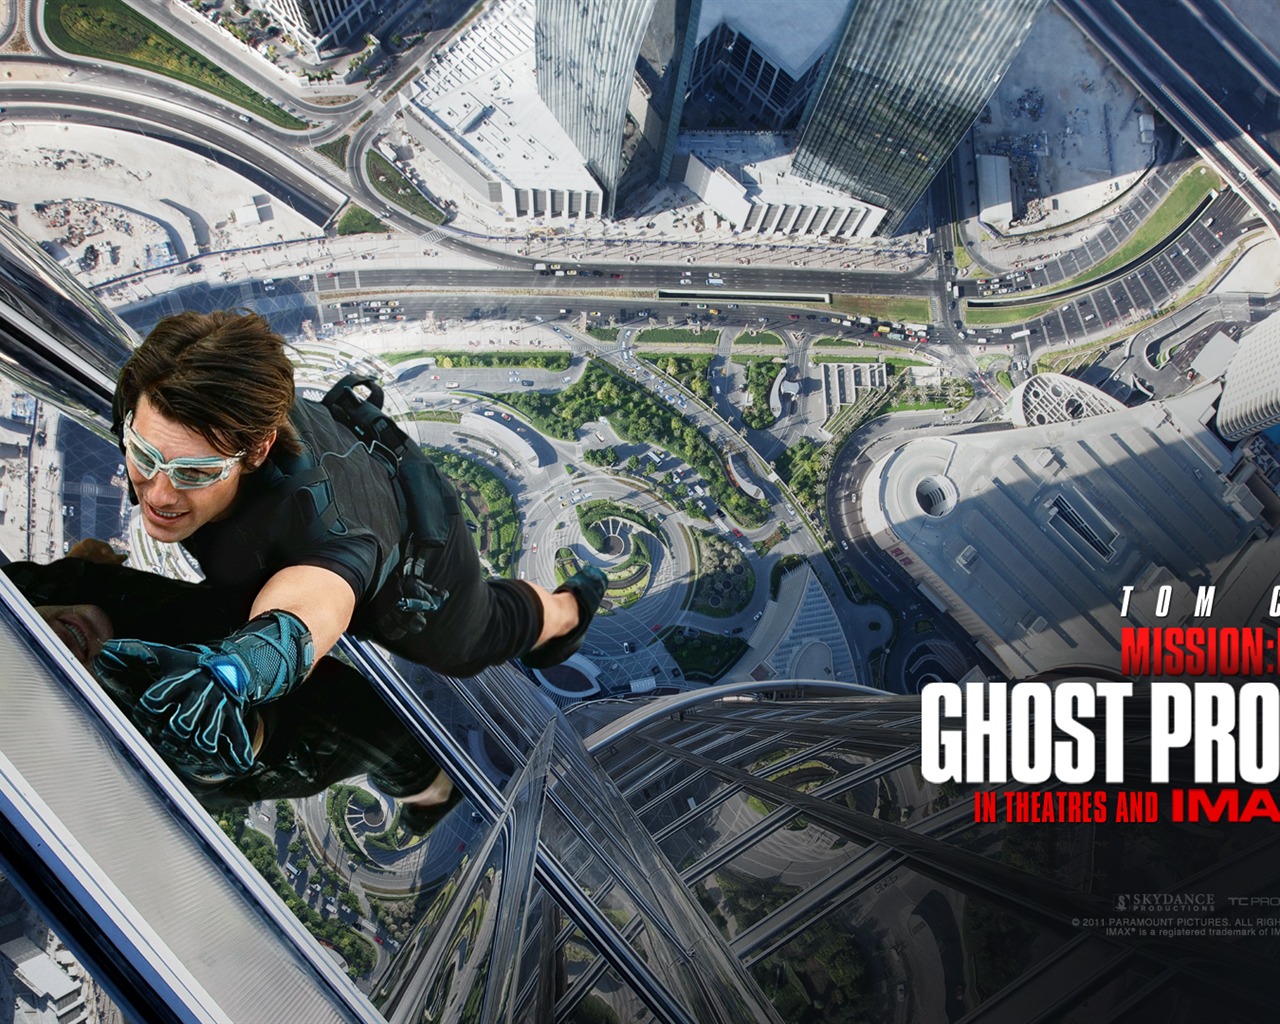 Mission: Impossible - Ghost Protocol wallpapers HD #10 - 1280x1024